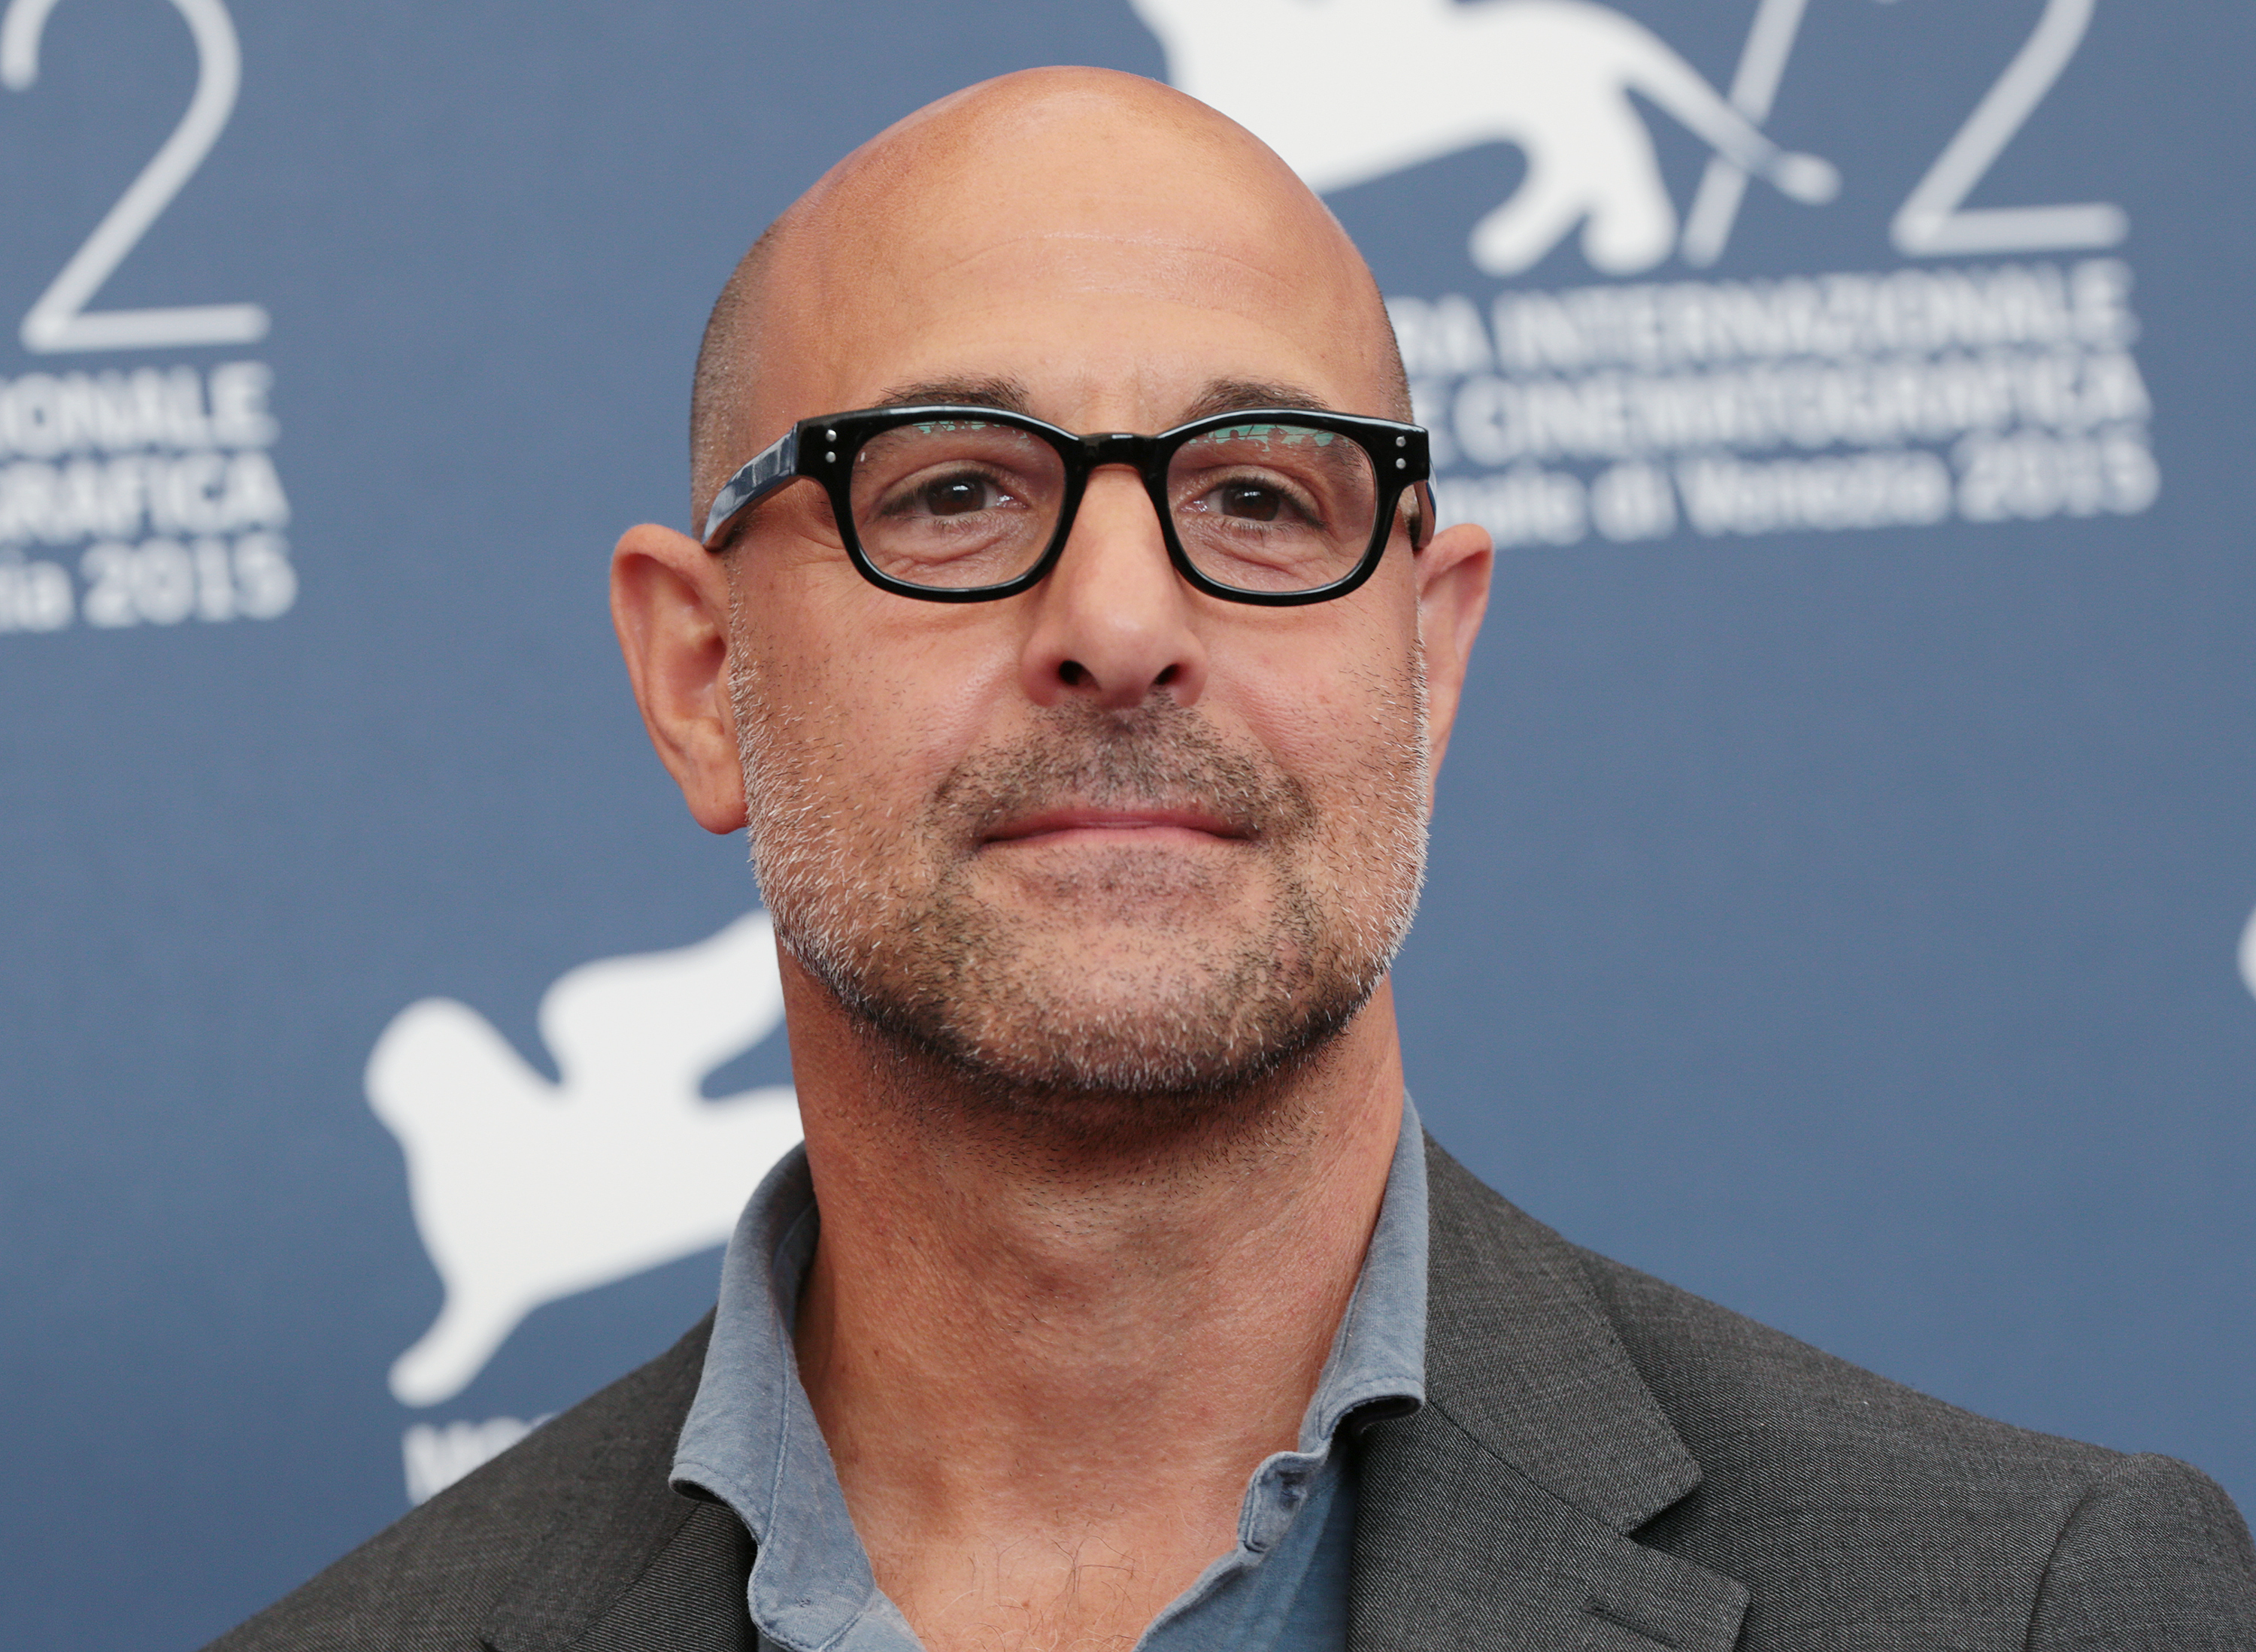 An evening with Stanley Tucci | Things to do in London